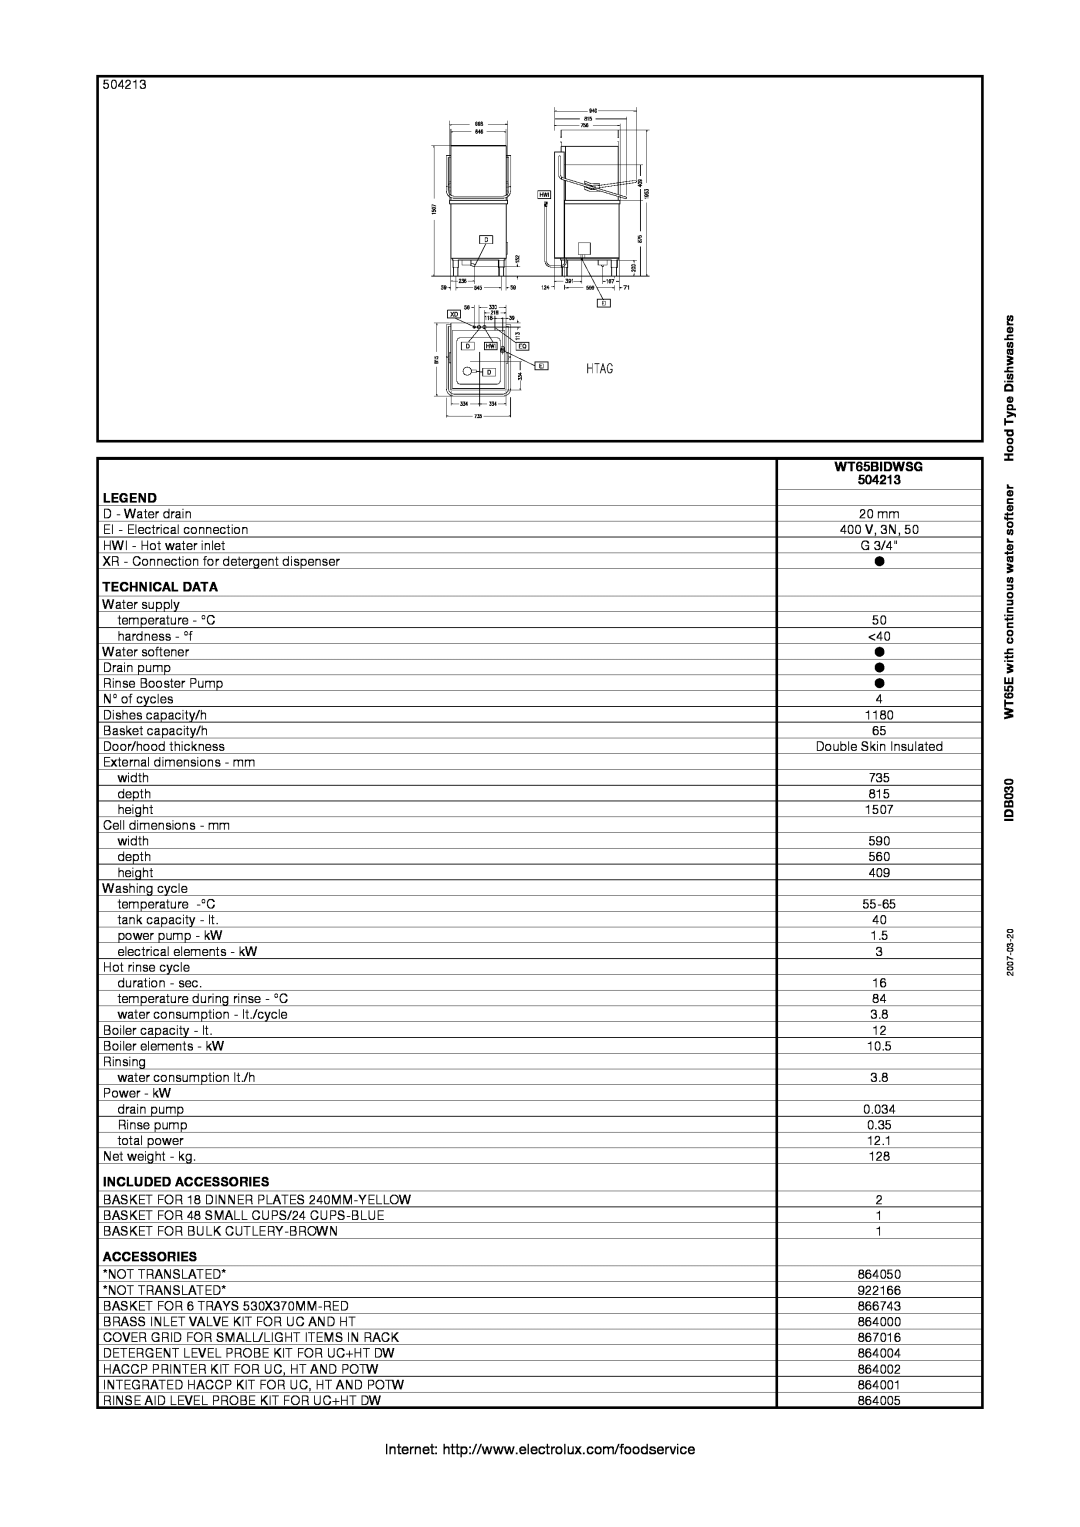 Electrolux 504156 manual Technical Data, Included Accessories, WT65BIDWSG 